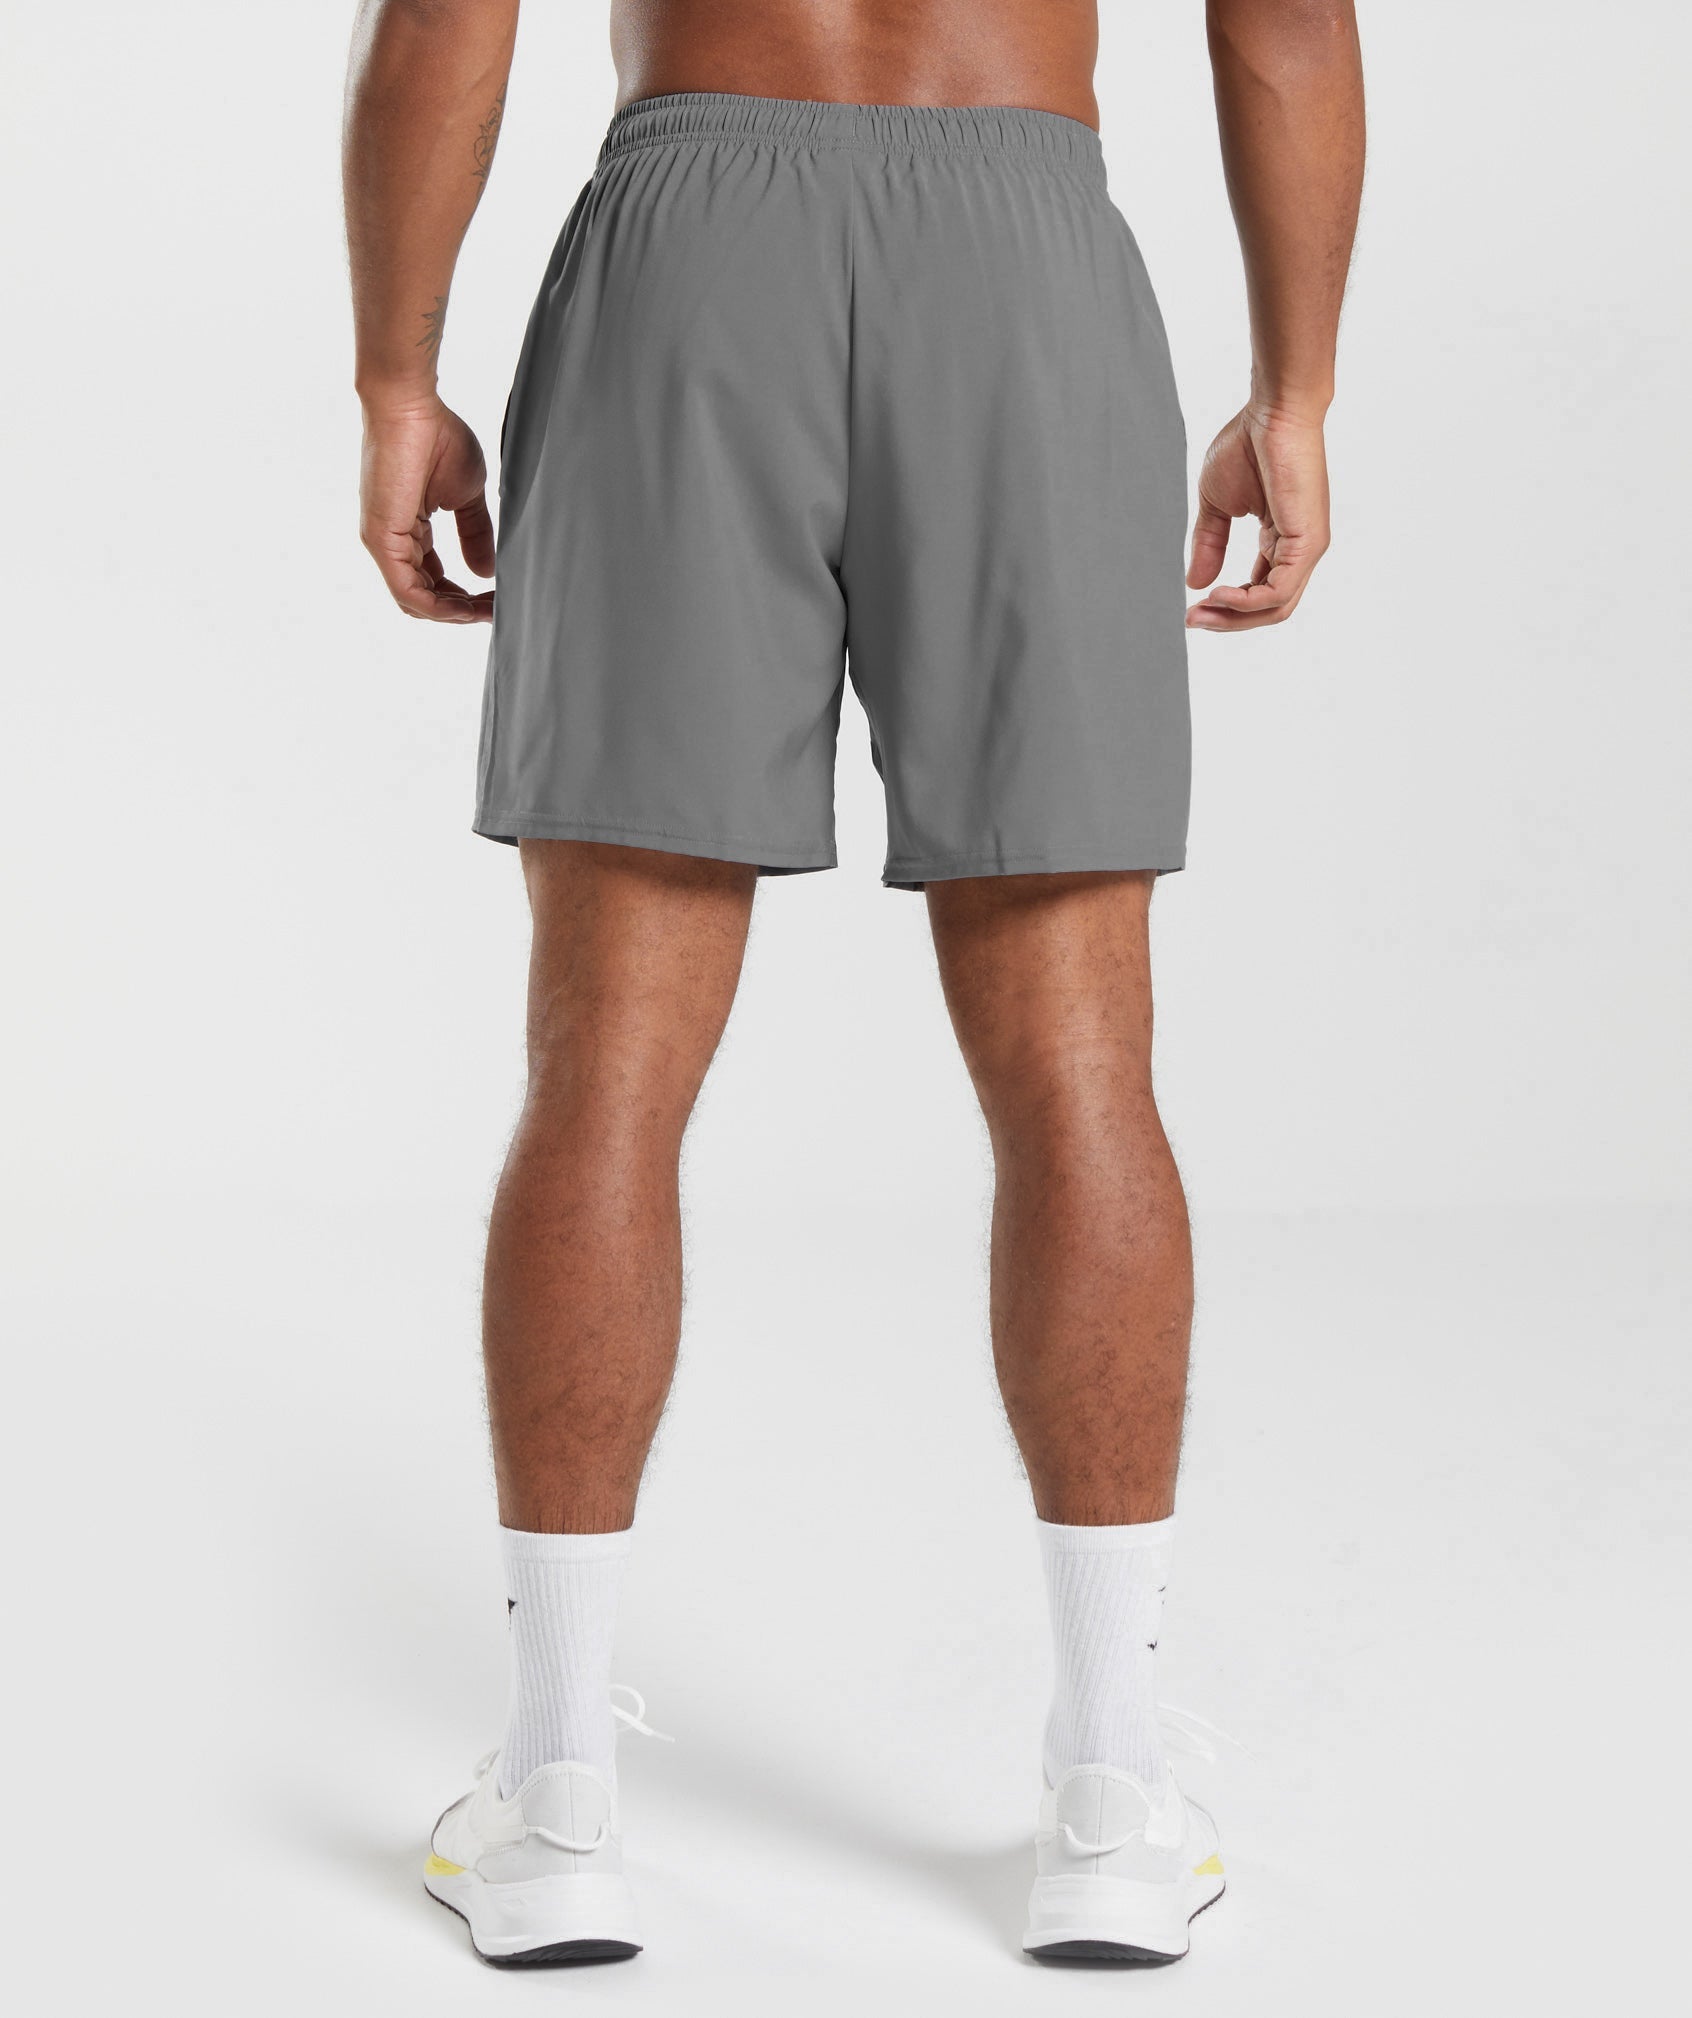 Arrival Shorts in Charcoal Grey - view 2